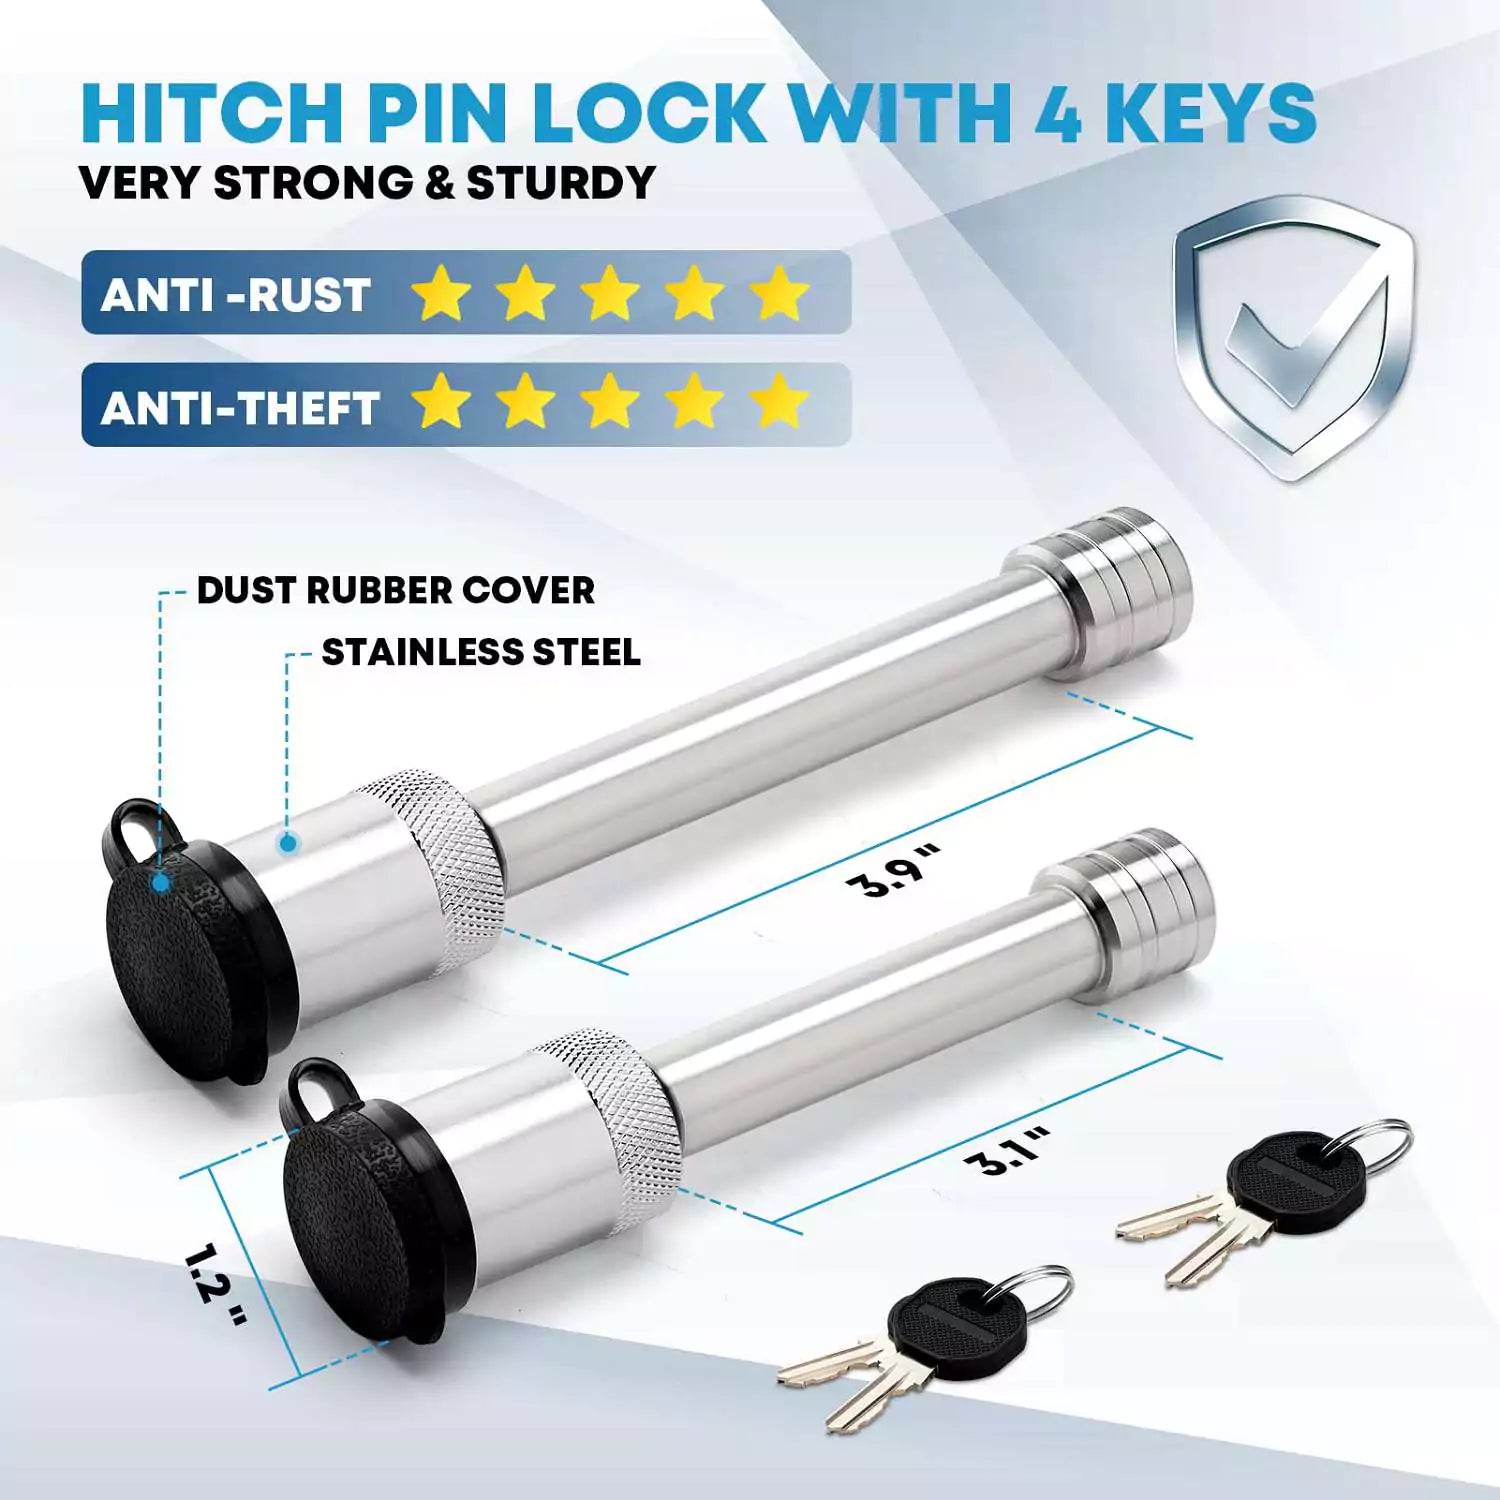 Hitch pin lock with 4 keys